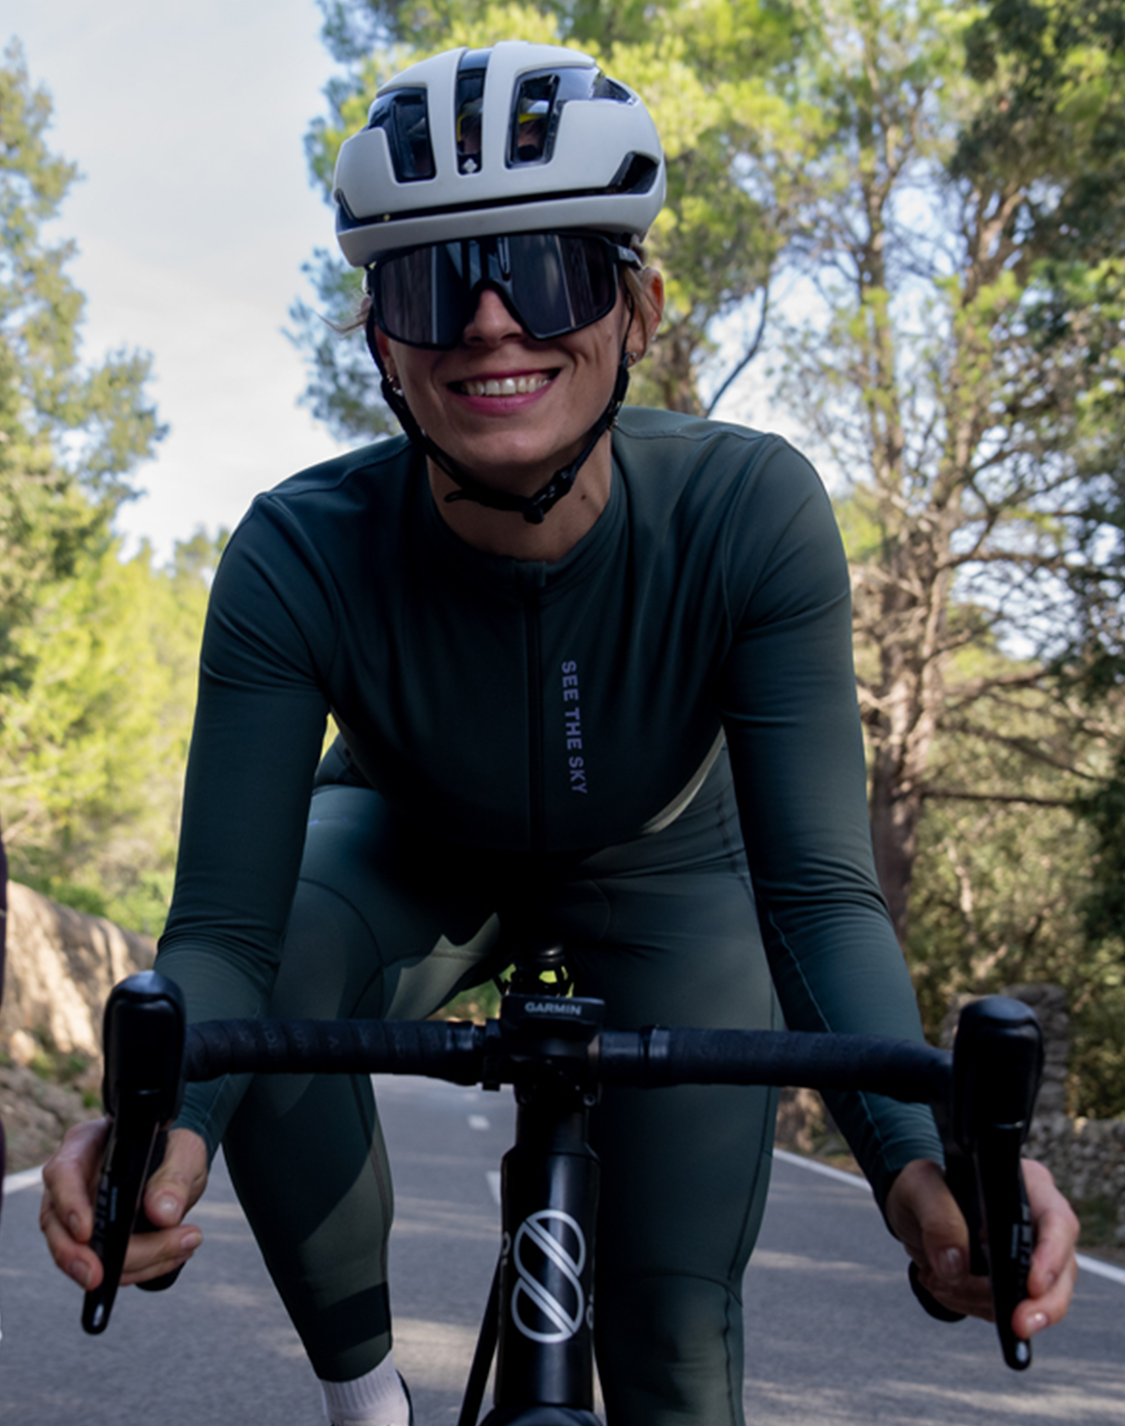 Women's See The Sky Thermal Jersey — Ash Forest